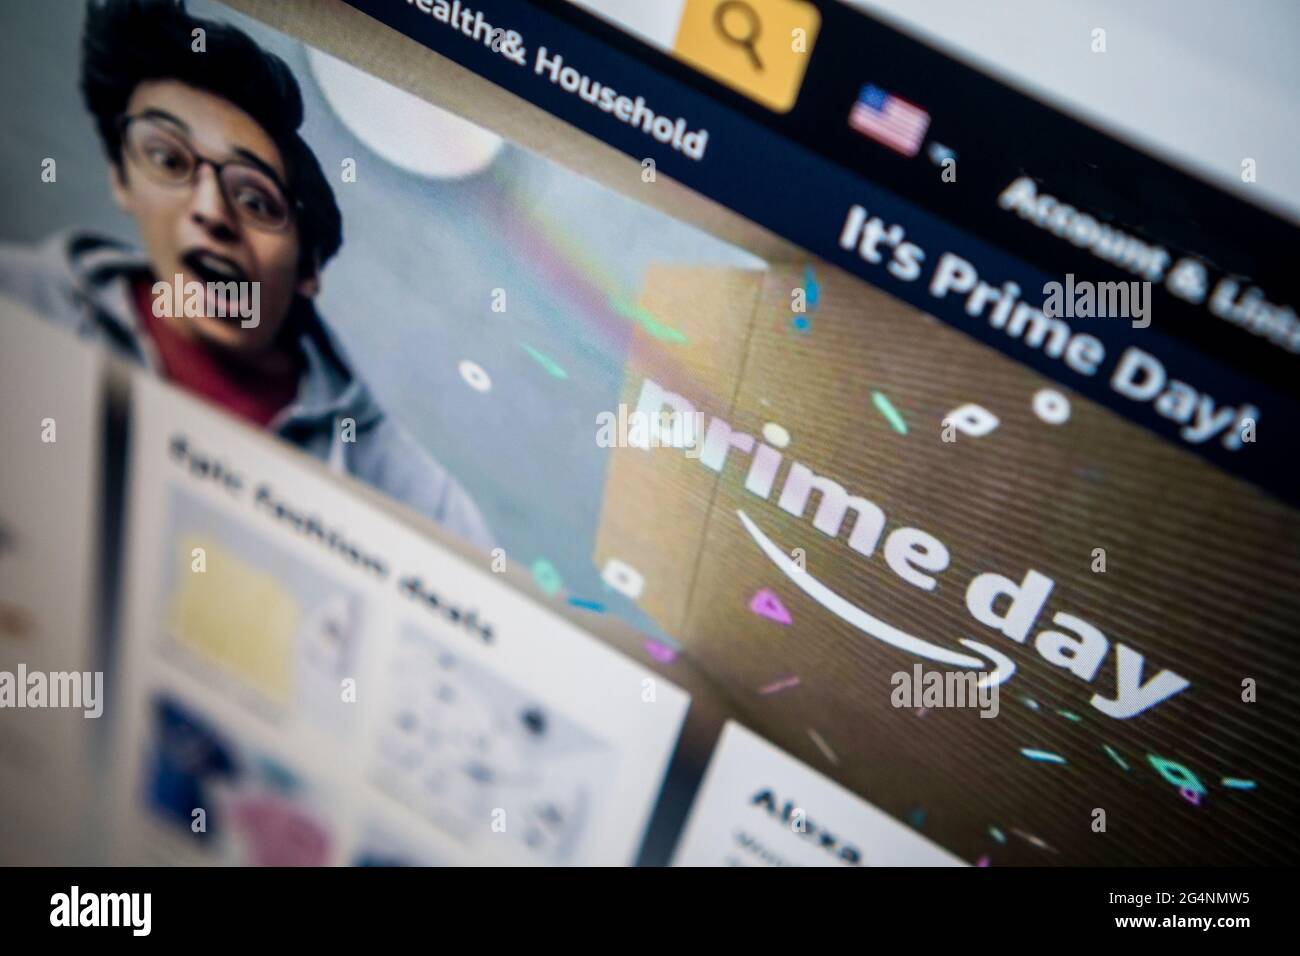 The Amazon website promotes their self-proclaimed 'Prime Day' on Monday, June 21, 2021. This is the seventh year that Amazon is offering bargains and deals galore to Amazon Prime shoppers on this two-day self-proclaimed holiday event. Other retailers including Wal-Mart, Target and Macy’s are also offering savings during this time (© Richard B. Levine) Stock Photo